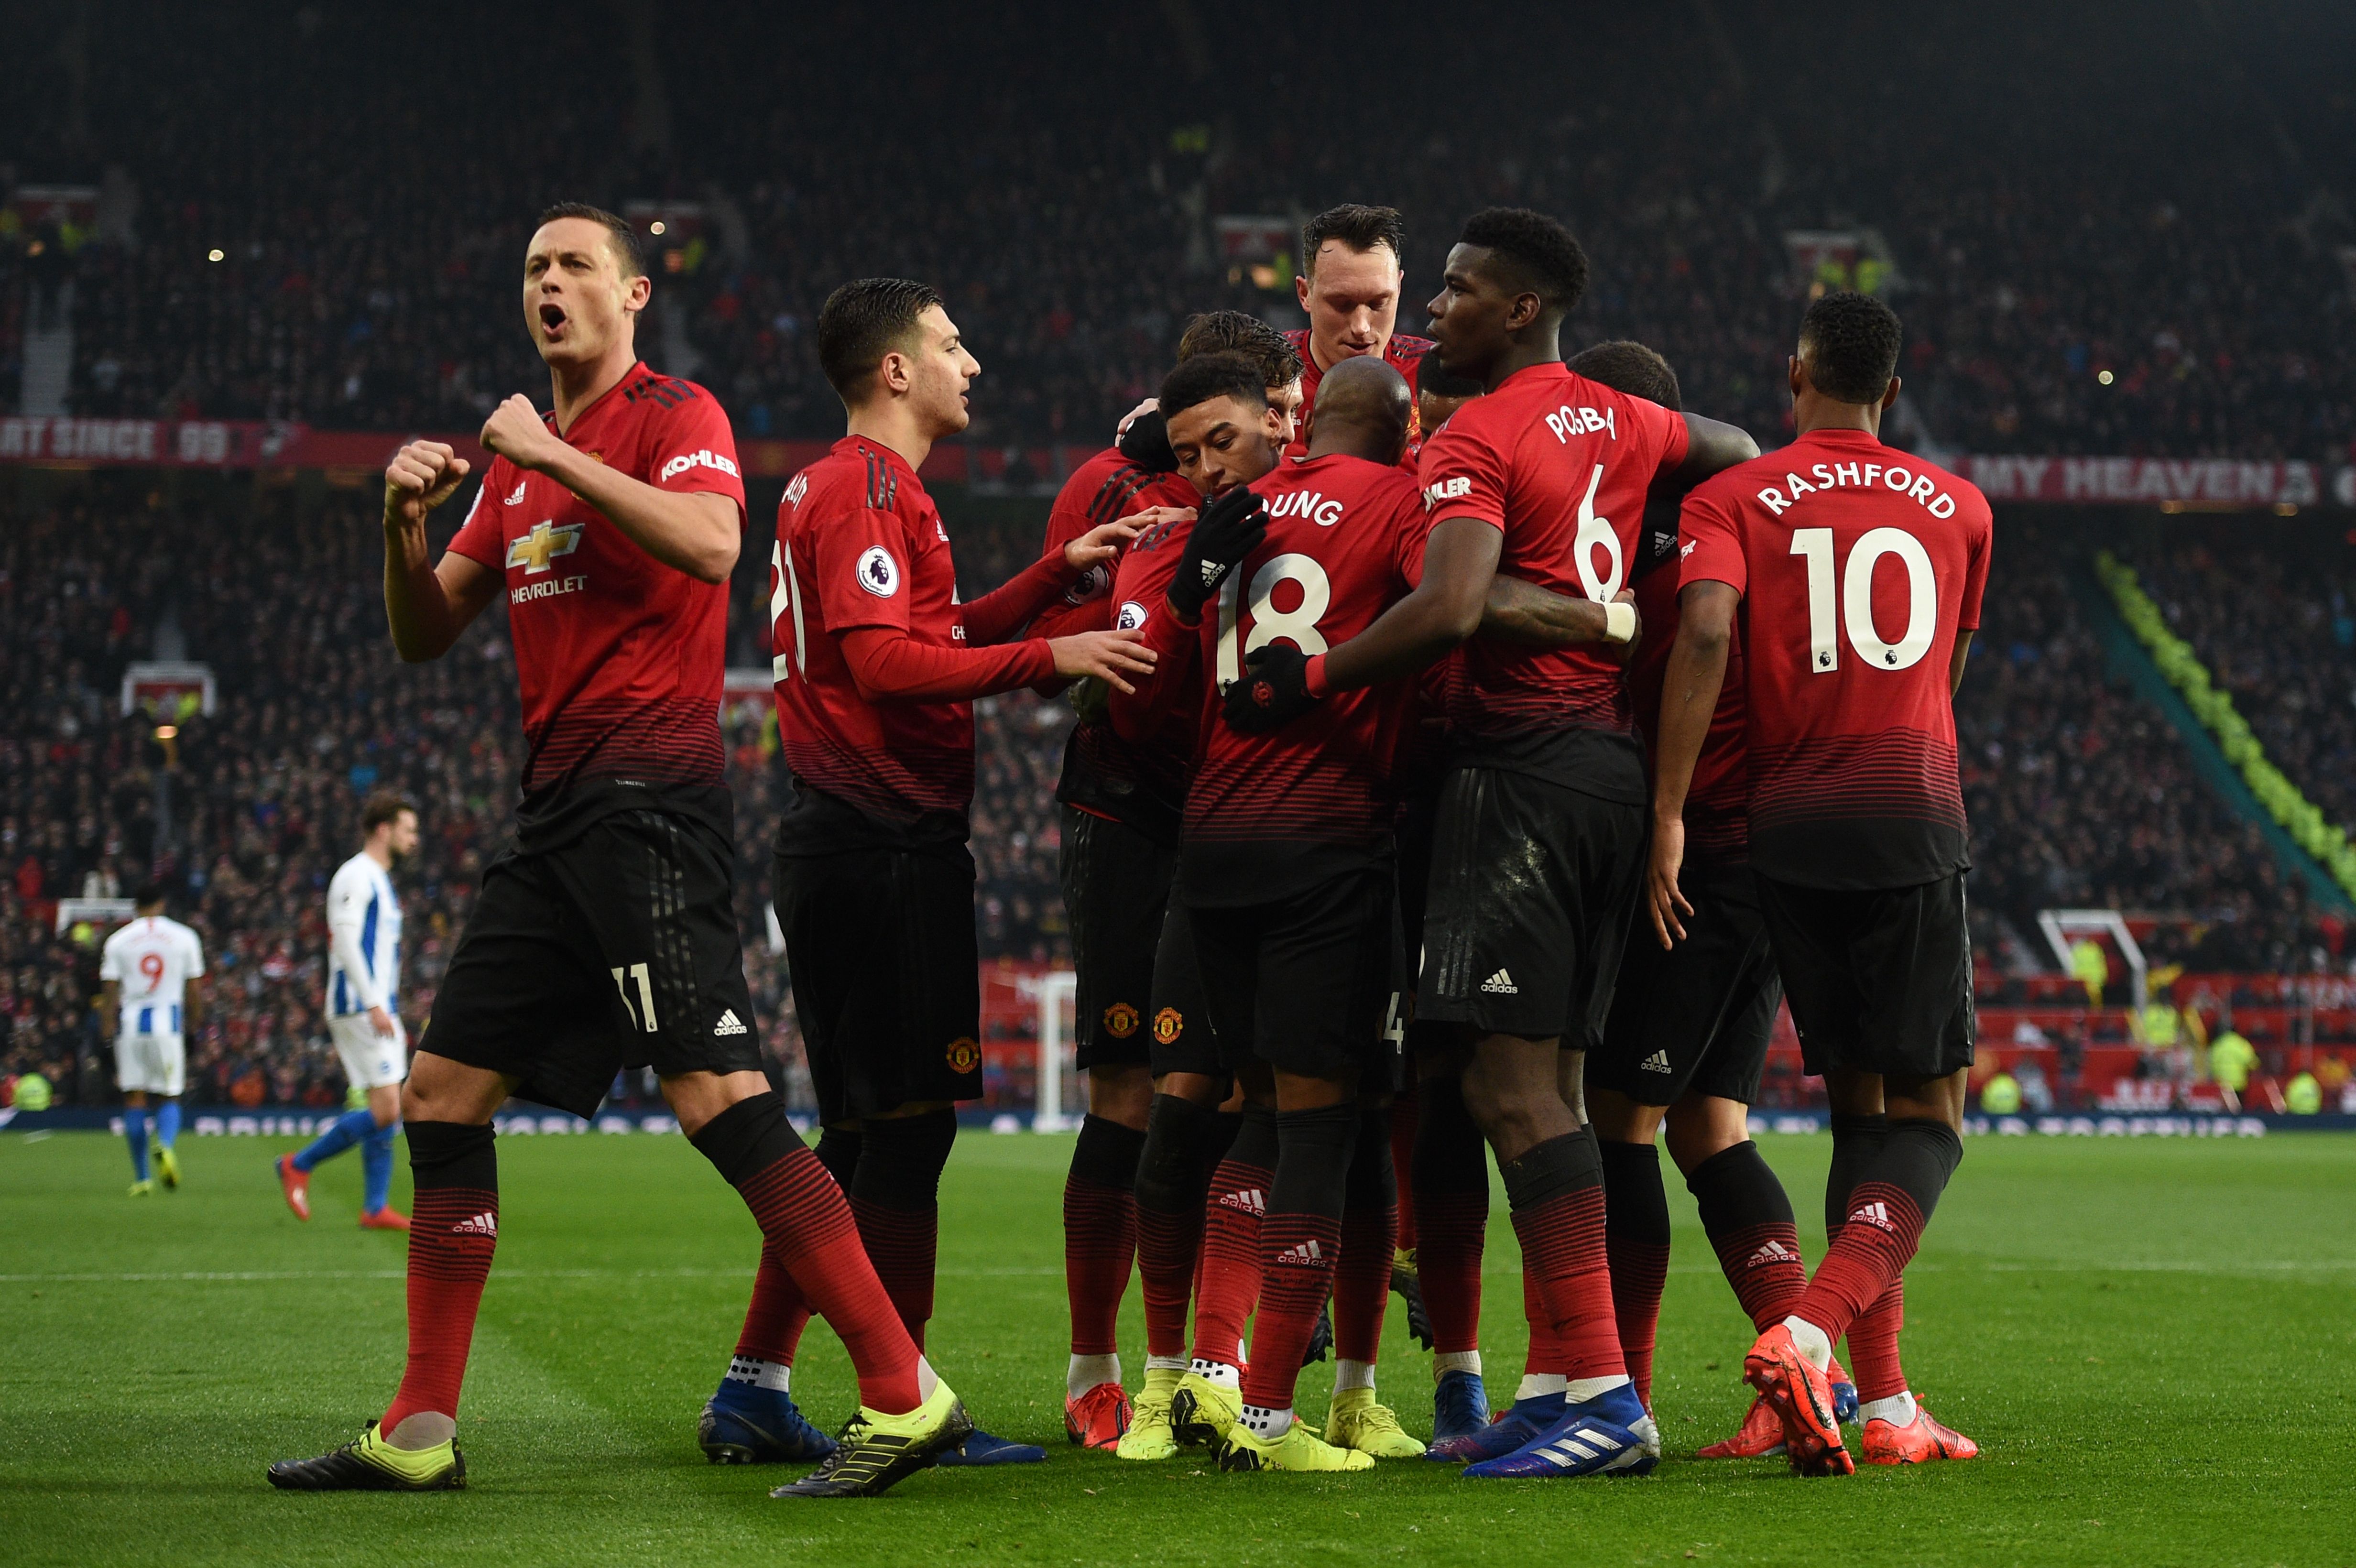 Manchester United's French midfielder Paul Pogba (2R) celebrates scoring the opening goal from the penalty spot with team-mates during the English Premier League football match between Manchester United and Brighton and Hove Albion at Old Trafford in Manchester, north west England, on January 19, 2019. (Photo by Oli SCARFF / AFP) / RESTRICTED TO EDITORIAL USE. No use with unauthorized audio, video, data, fixture lists, club/league logos or 'live' services. Online in-match use limited to 120 images. An additional 40 images may be used in extra time. No video emulation. Social media in-match use limited to 120 images. An additional 40 images may be used in extra time. No use in betting publications, games or single club/league/player publications. /         (Photo credit should read OLI SCARFF/AFP/Getty Images)